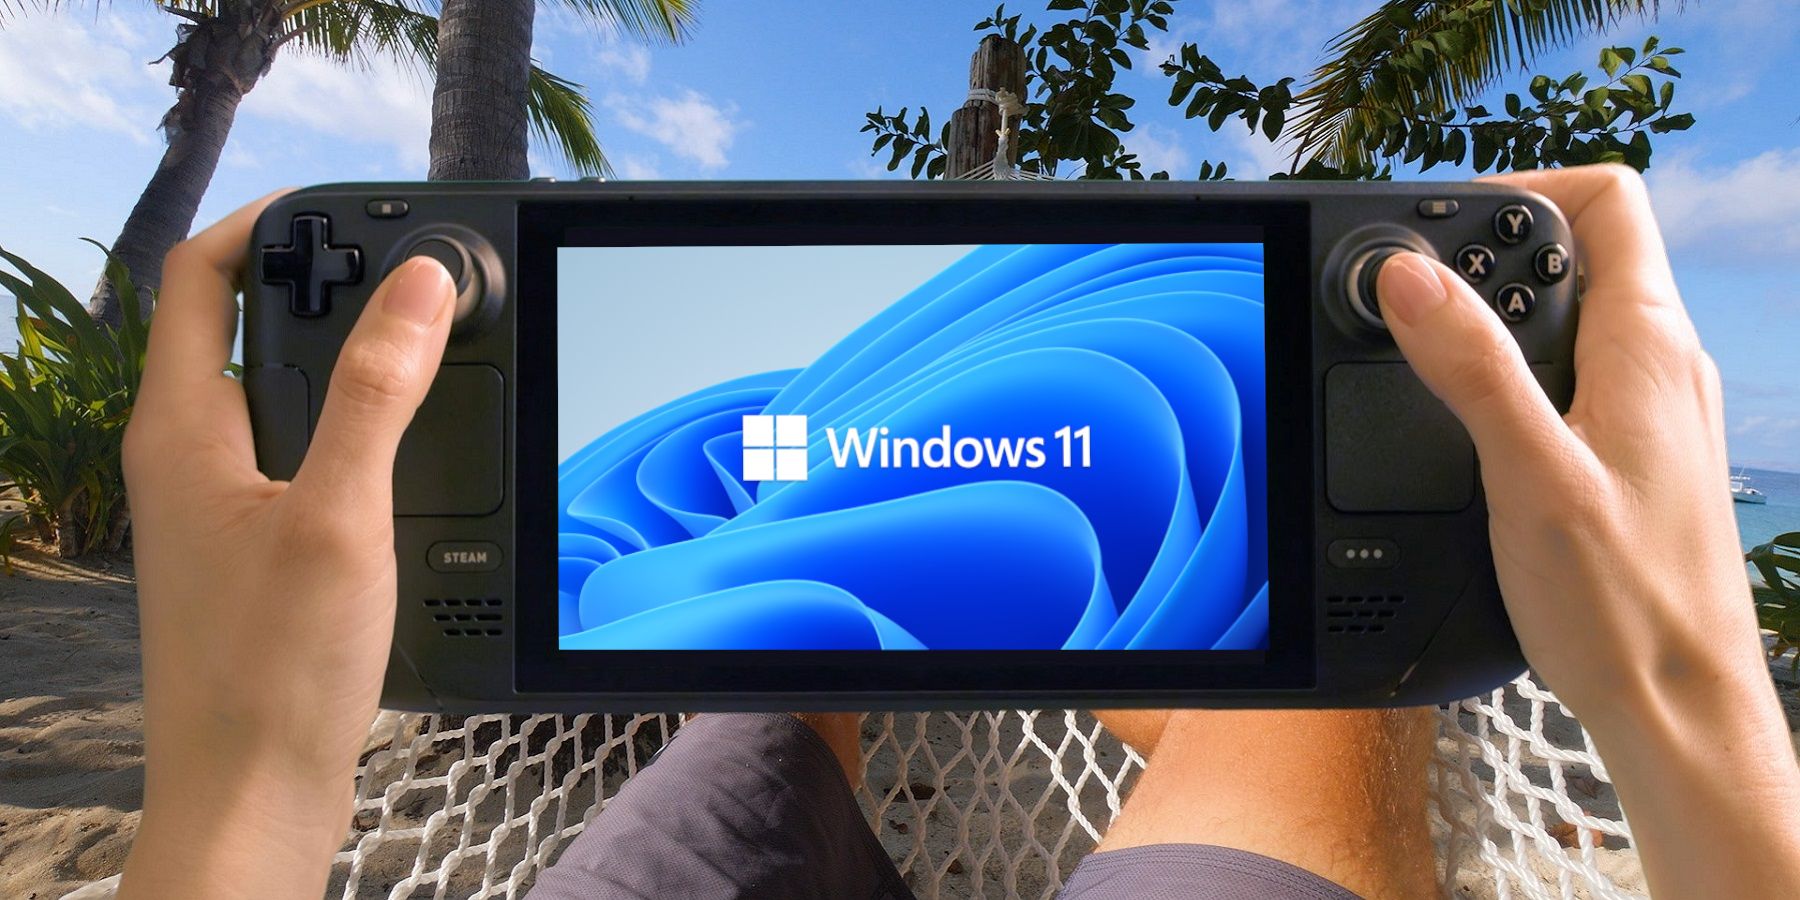 An image of someone holding a Steam Deck that has the Windows 11 logo on the screen.